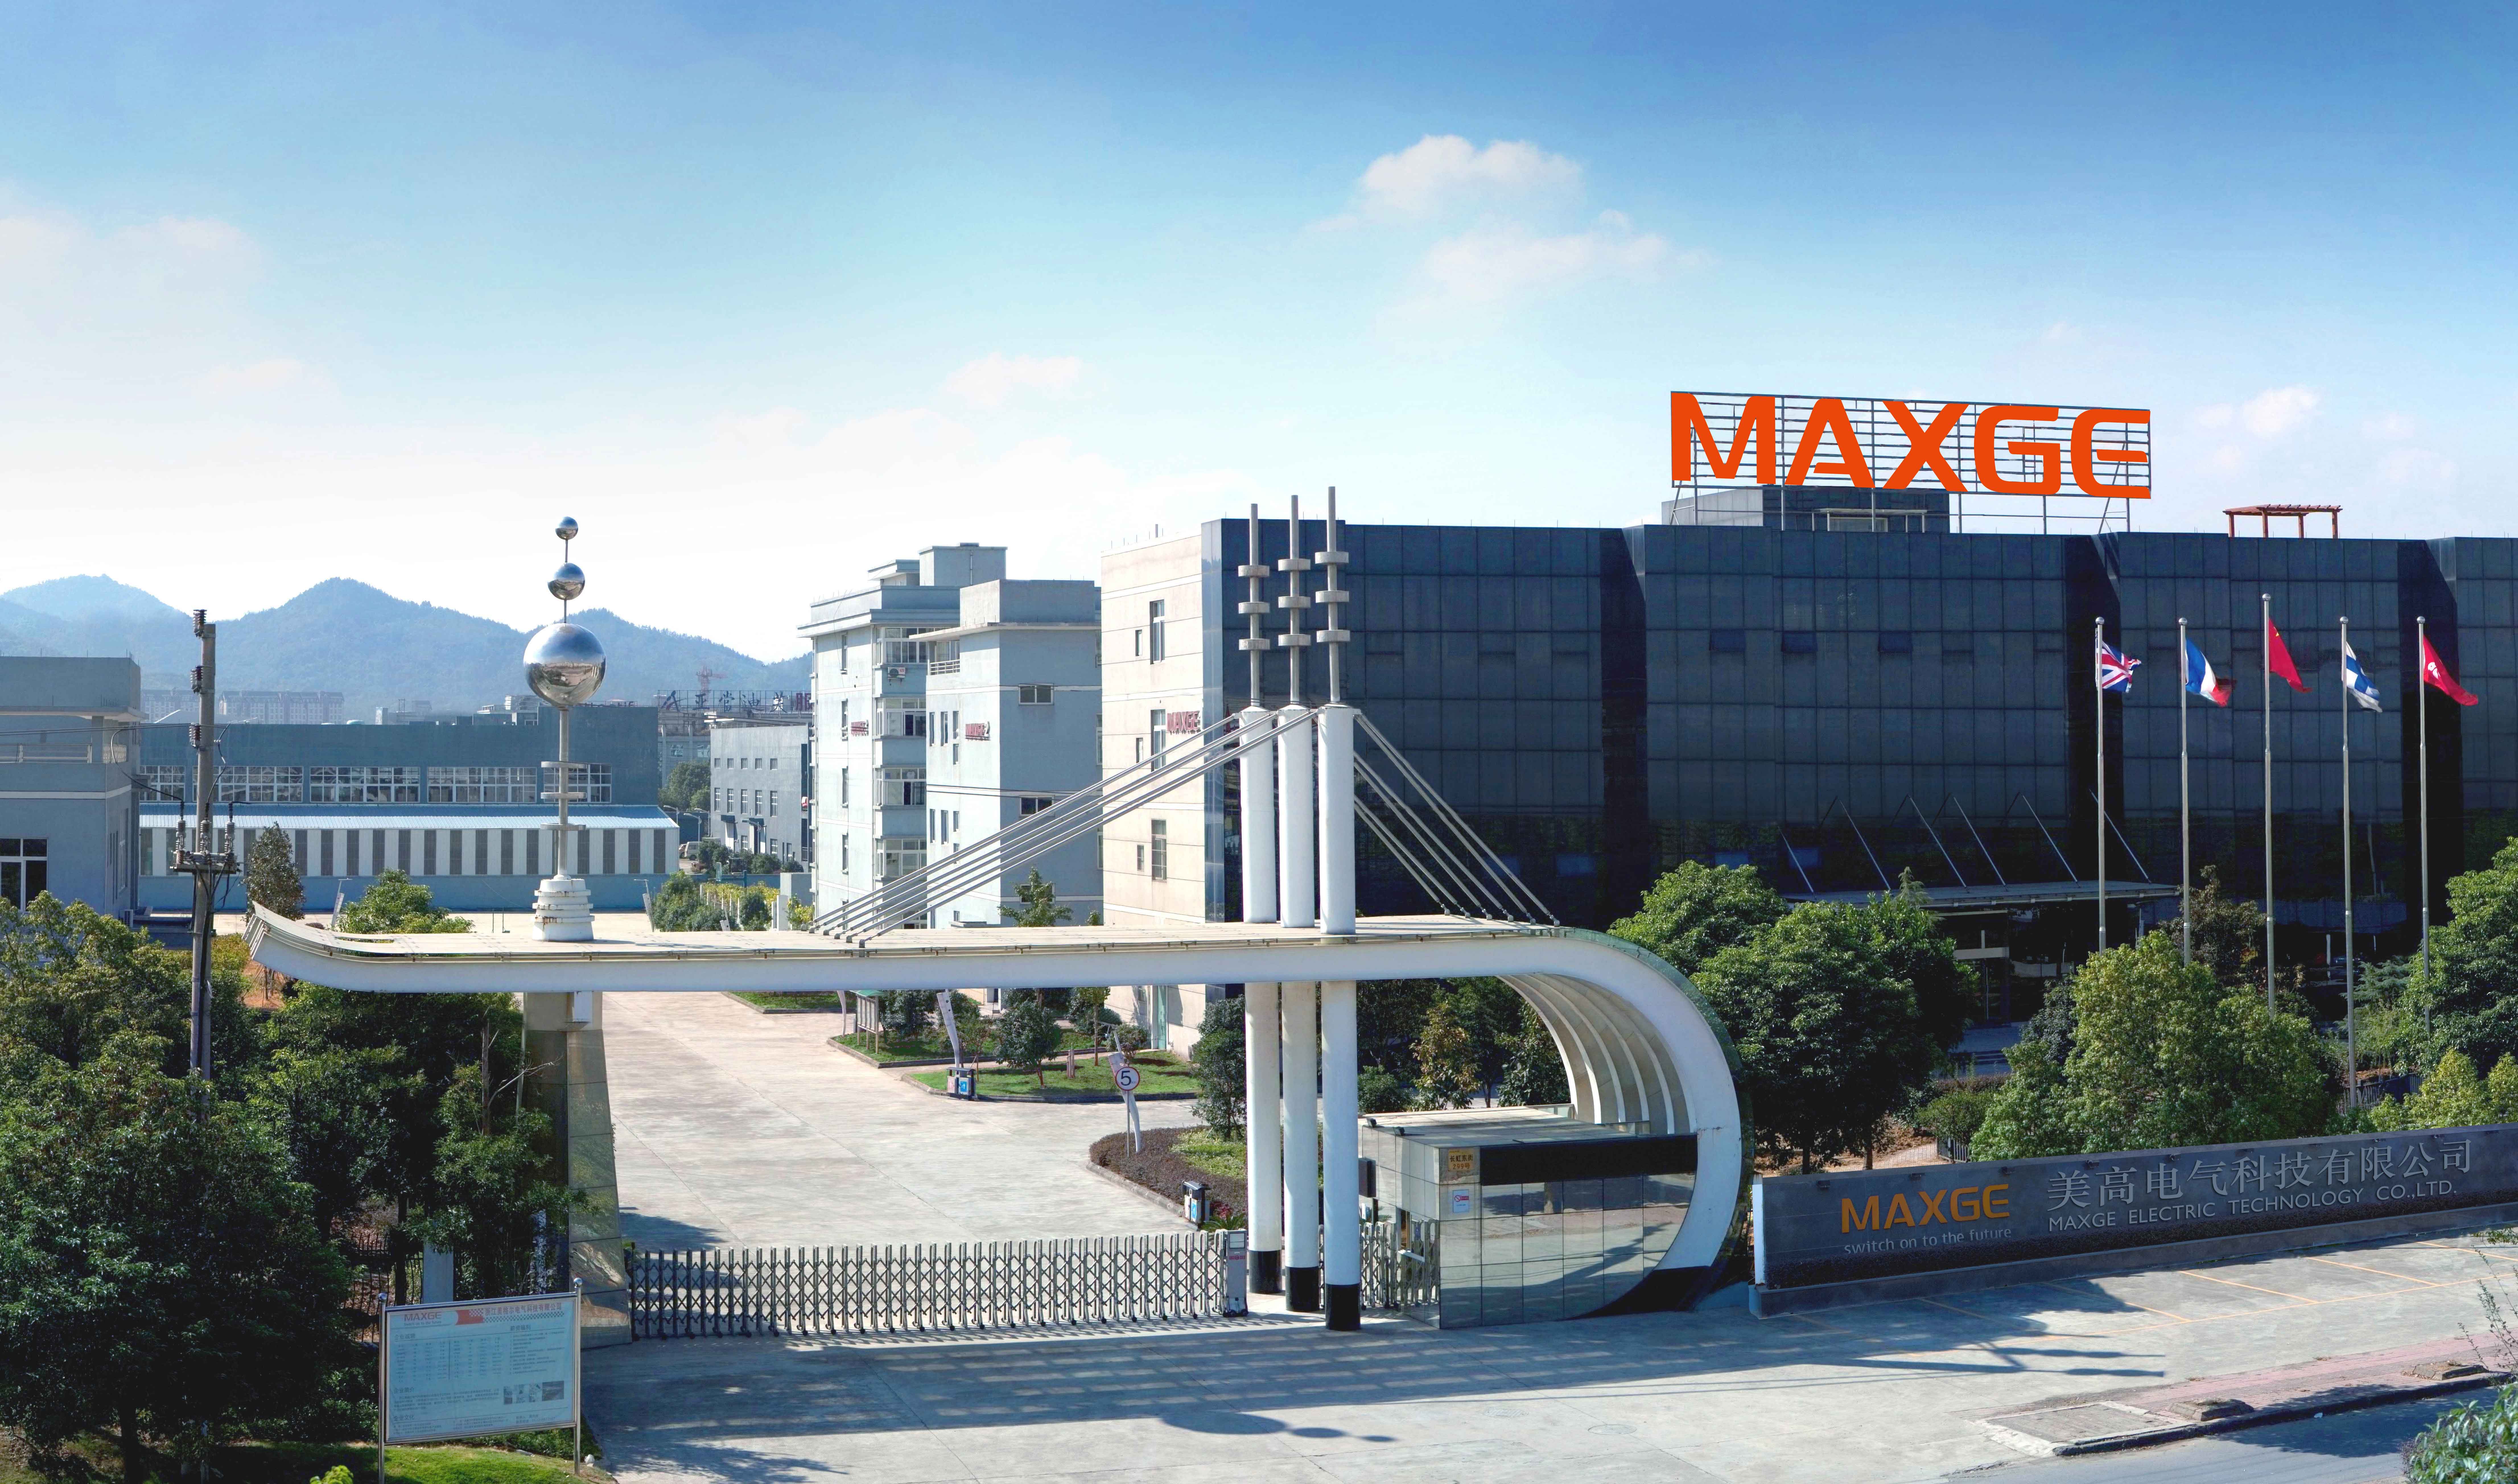 MAXGE was successfully selected as the pilot demonstration enterprise of the integration development of new generation information technology and manufacturing industry in Zhejiang Province in 2021